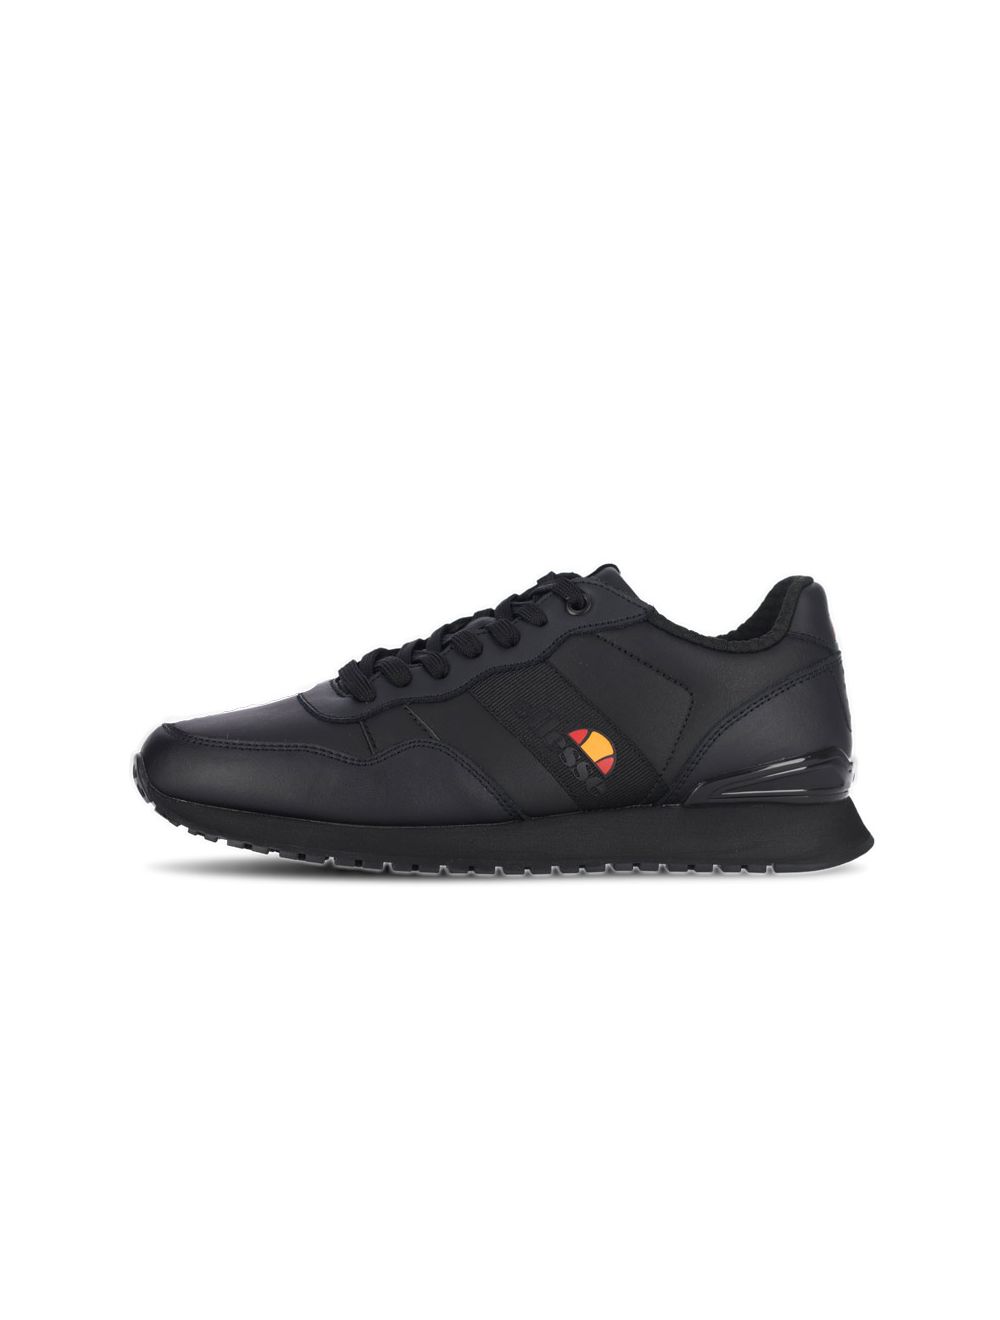 We worked with Ellesse Brand to bring a World Exclusive 'Black